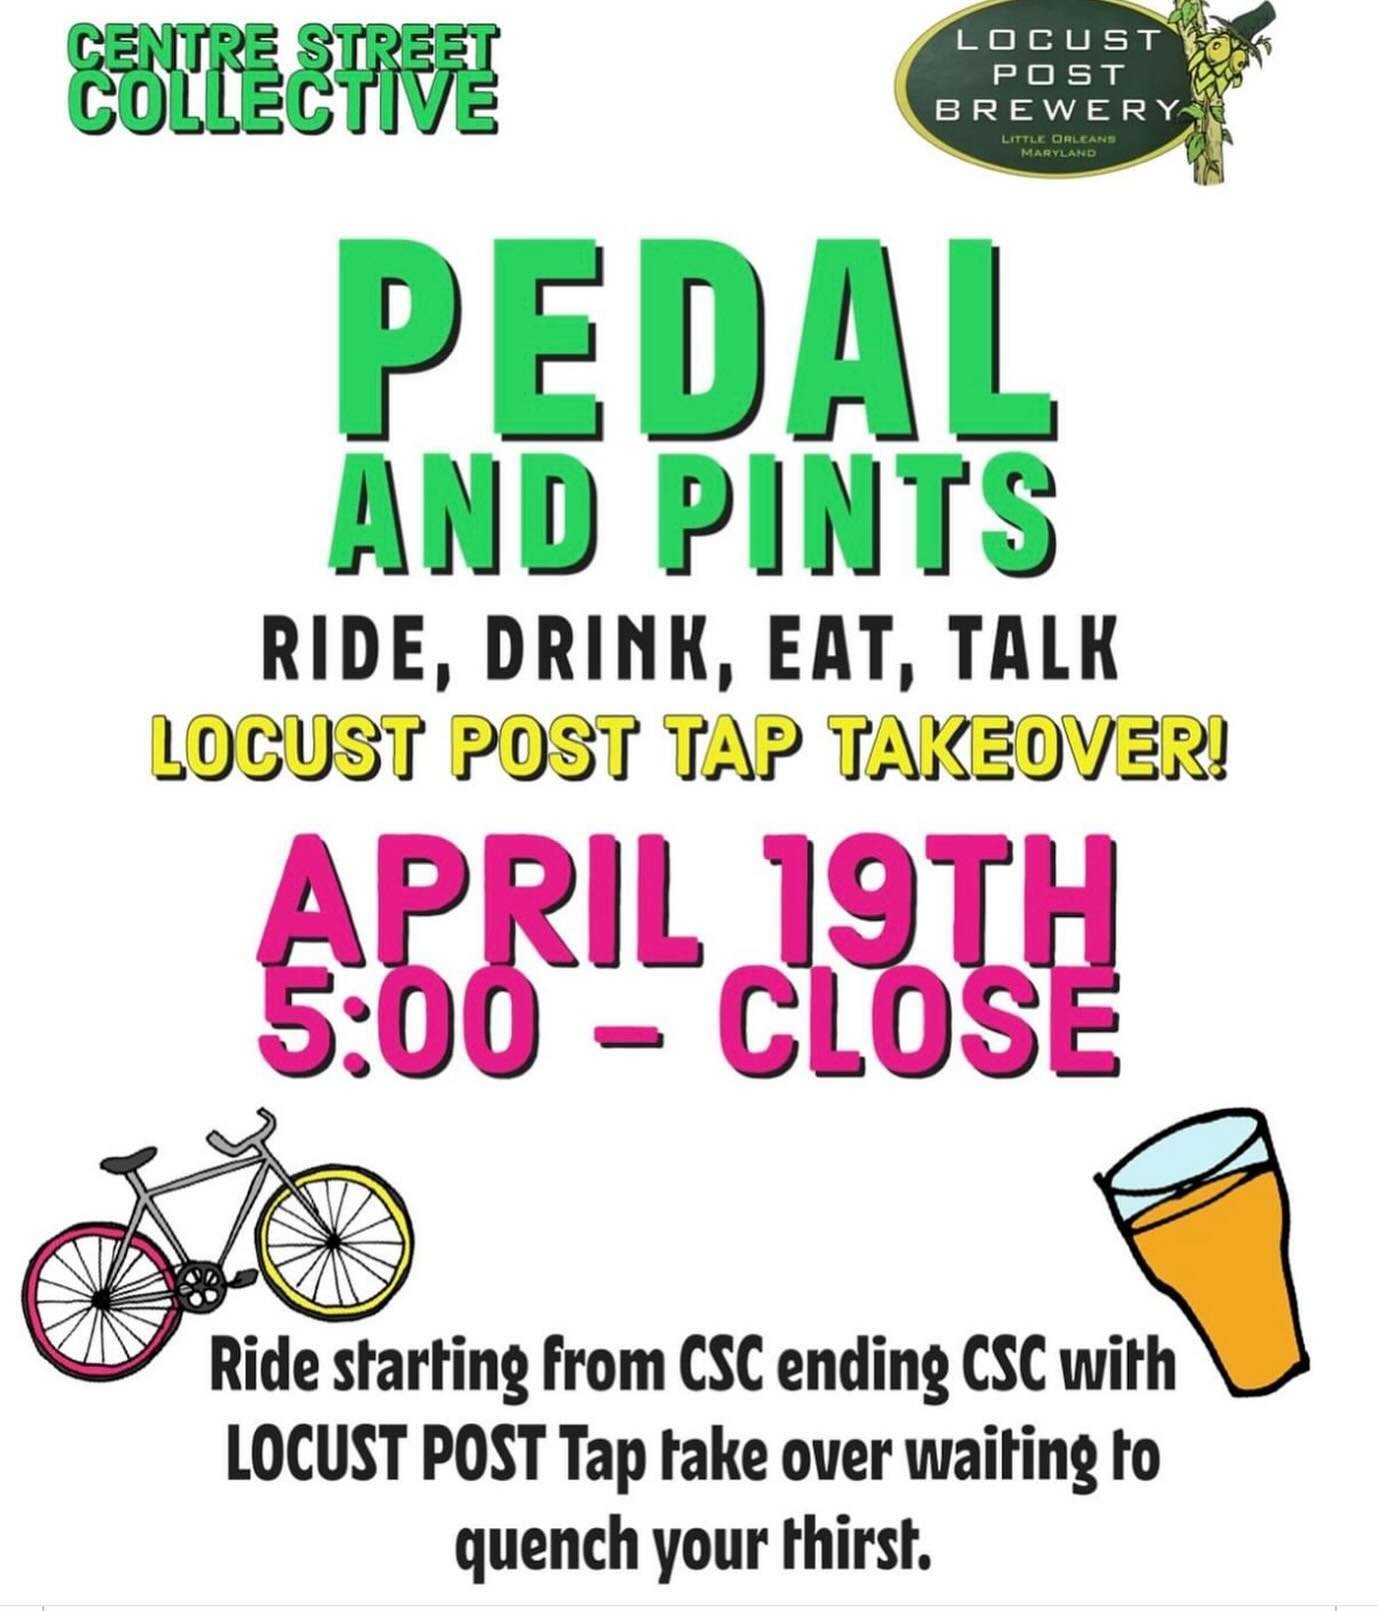 Pedal and Pints! With @locustpostbrewery tap take over! April 19th starting at 5:00!! More information about the ride coming soon! #downtowncumberlandmd #thismustbetheplacecumberlandmd #cscmd